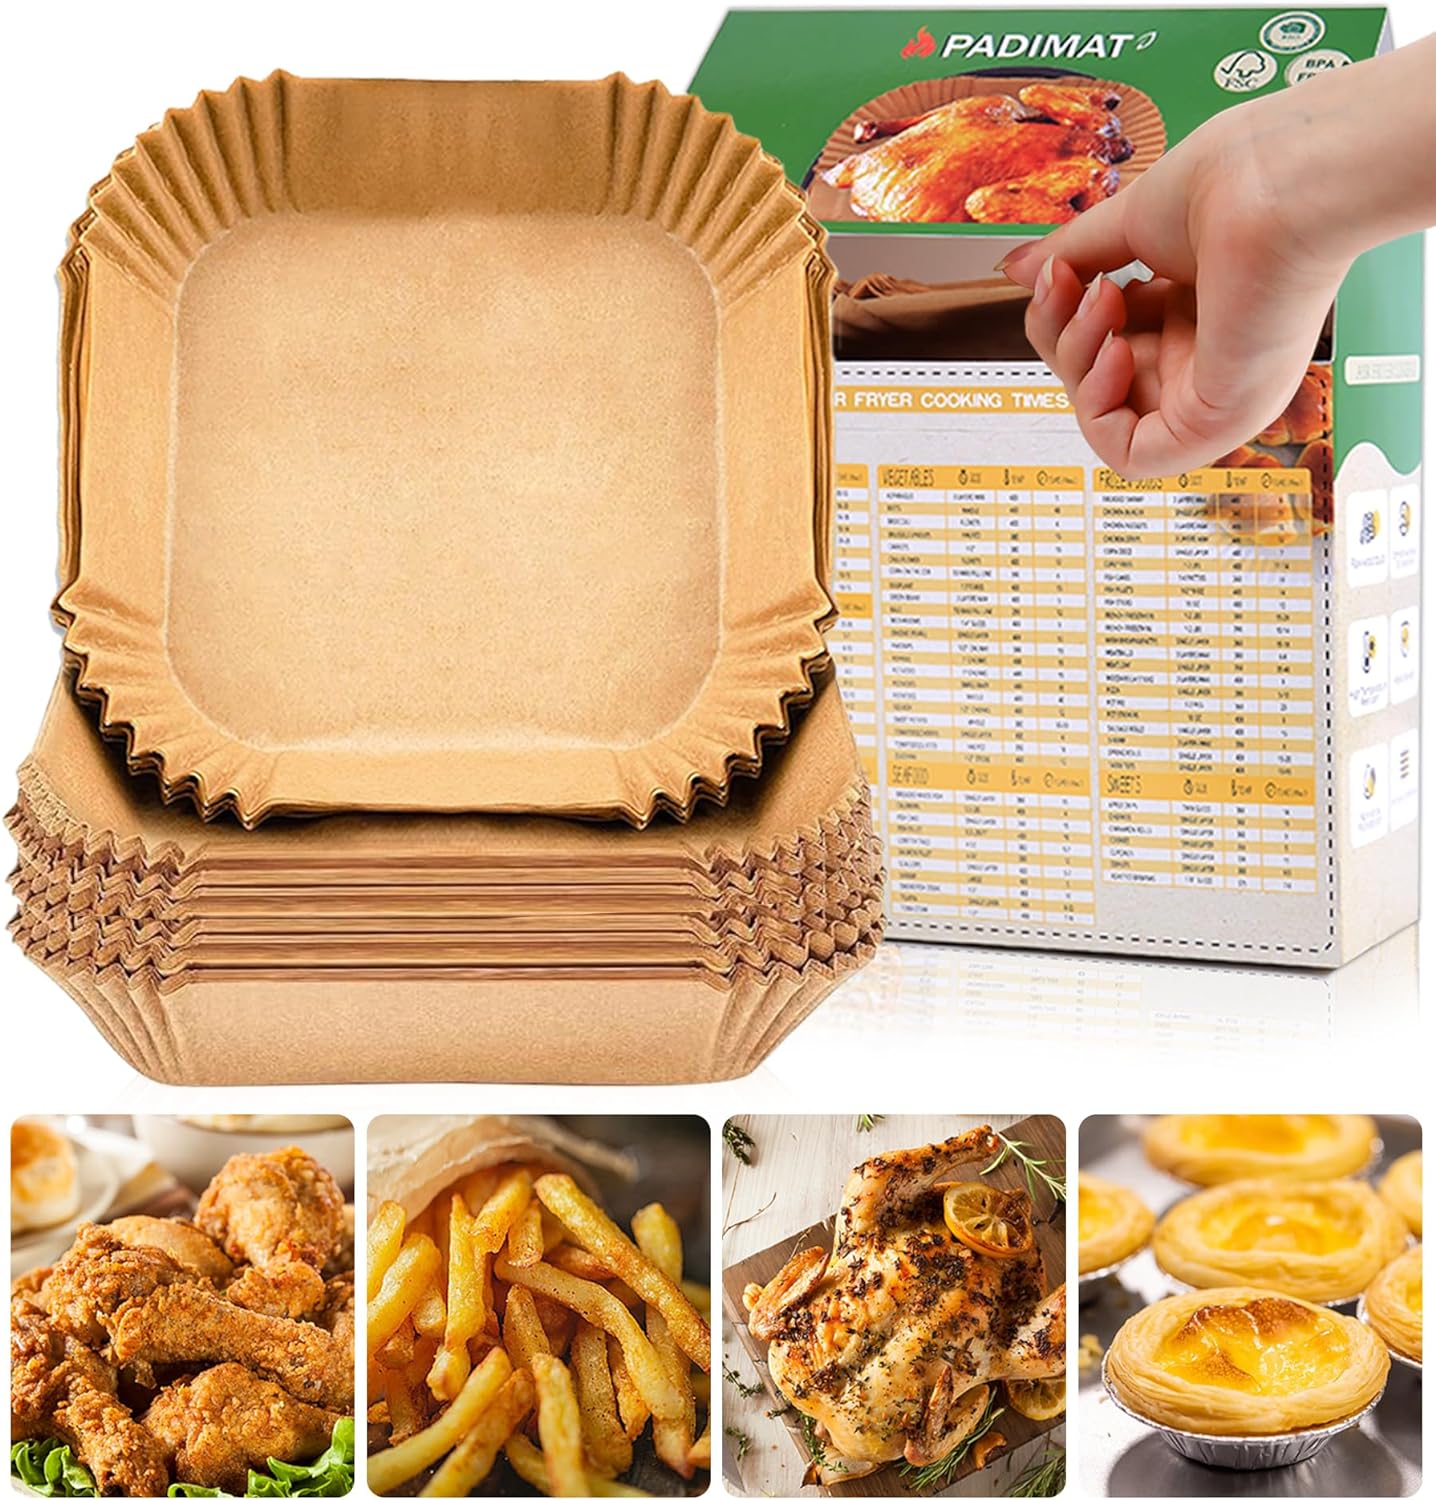 Air Fryer Disposable Paper Liners, 120 Pcs Square Airfryer Parchment Cooking Non-Stick Liner Accessories, Microwave Oven, Frying Pan, Oil-proof Air Fryers Filters Sheets for 5 6 7 8 Qt Baking Basket